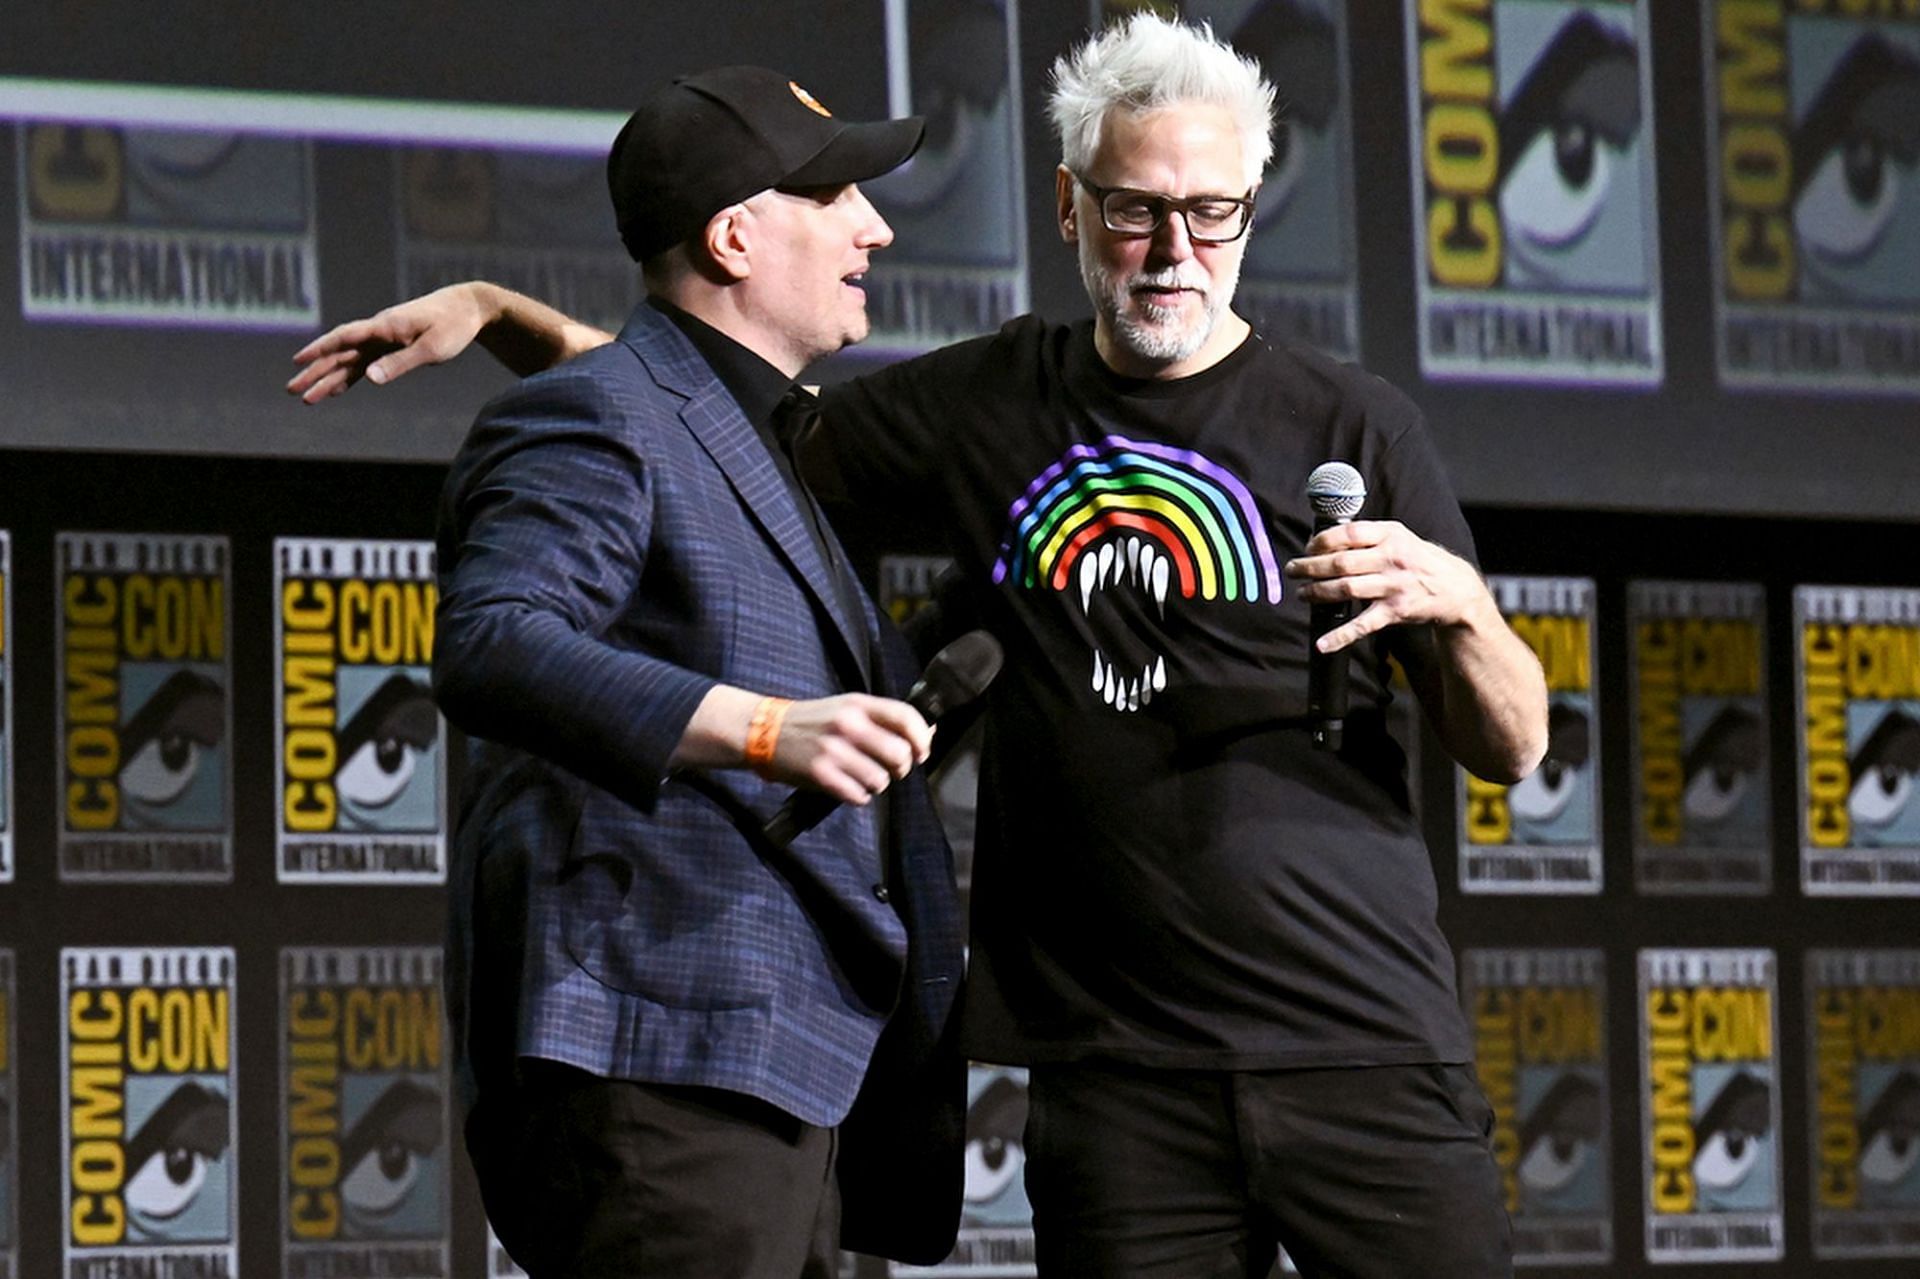 With James Gunn final Marvel film on the horizon and a new chapter in his career at DC, audiences eagerly anticipate what&#039;s to come (Image via Getty)